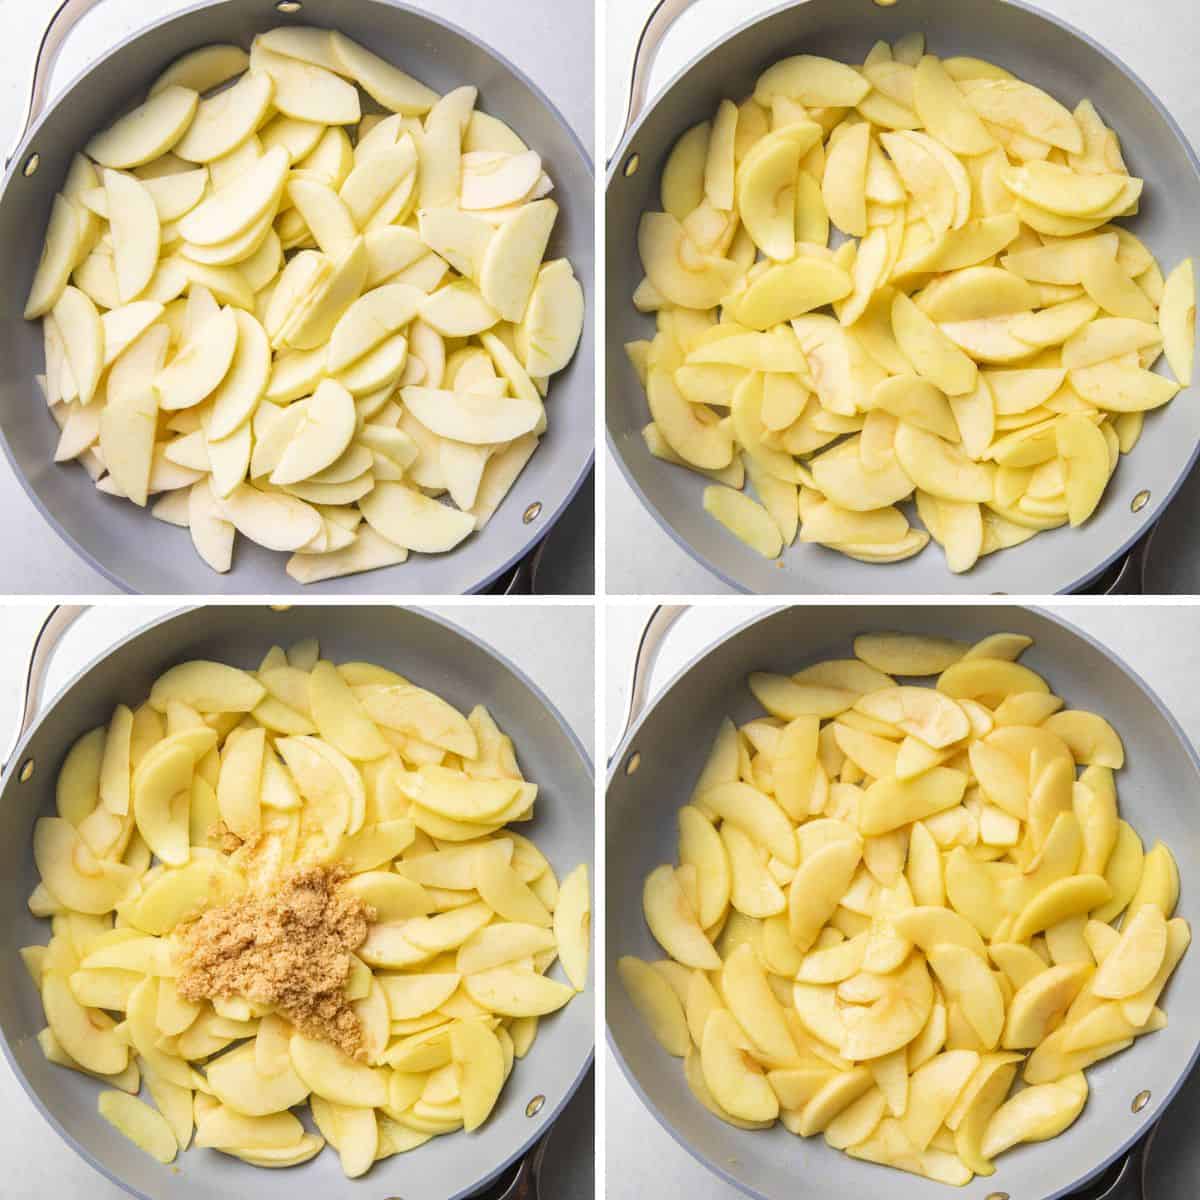 Process photos of cooking apple slices in a skillet.